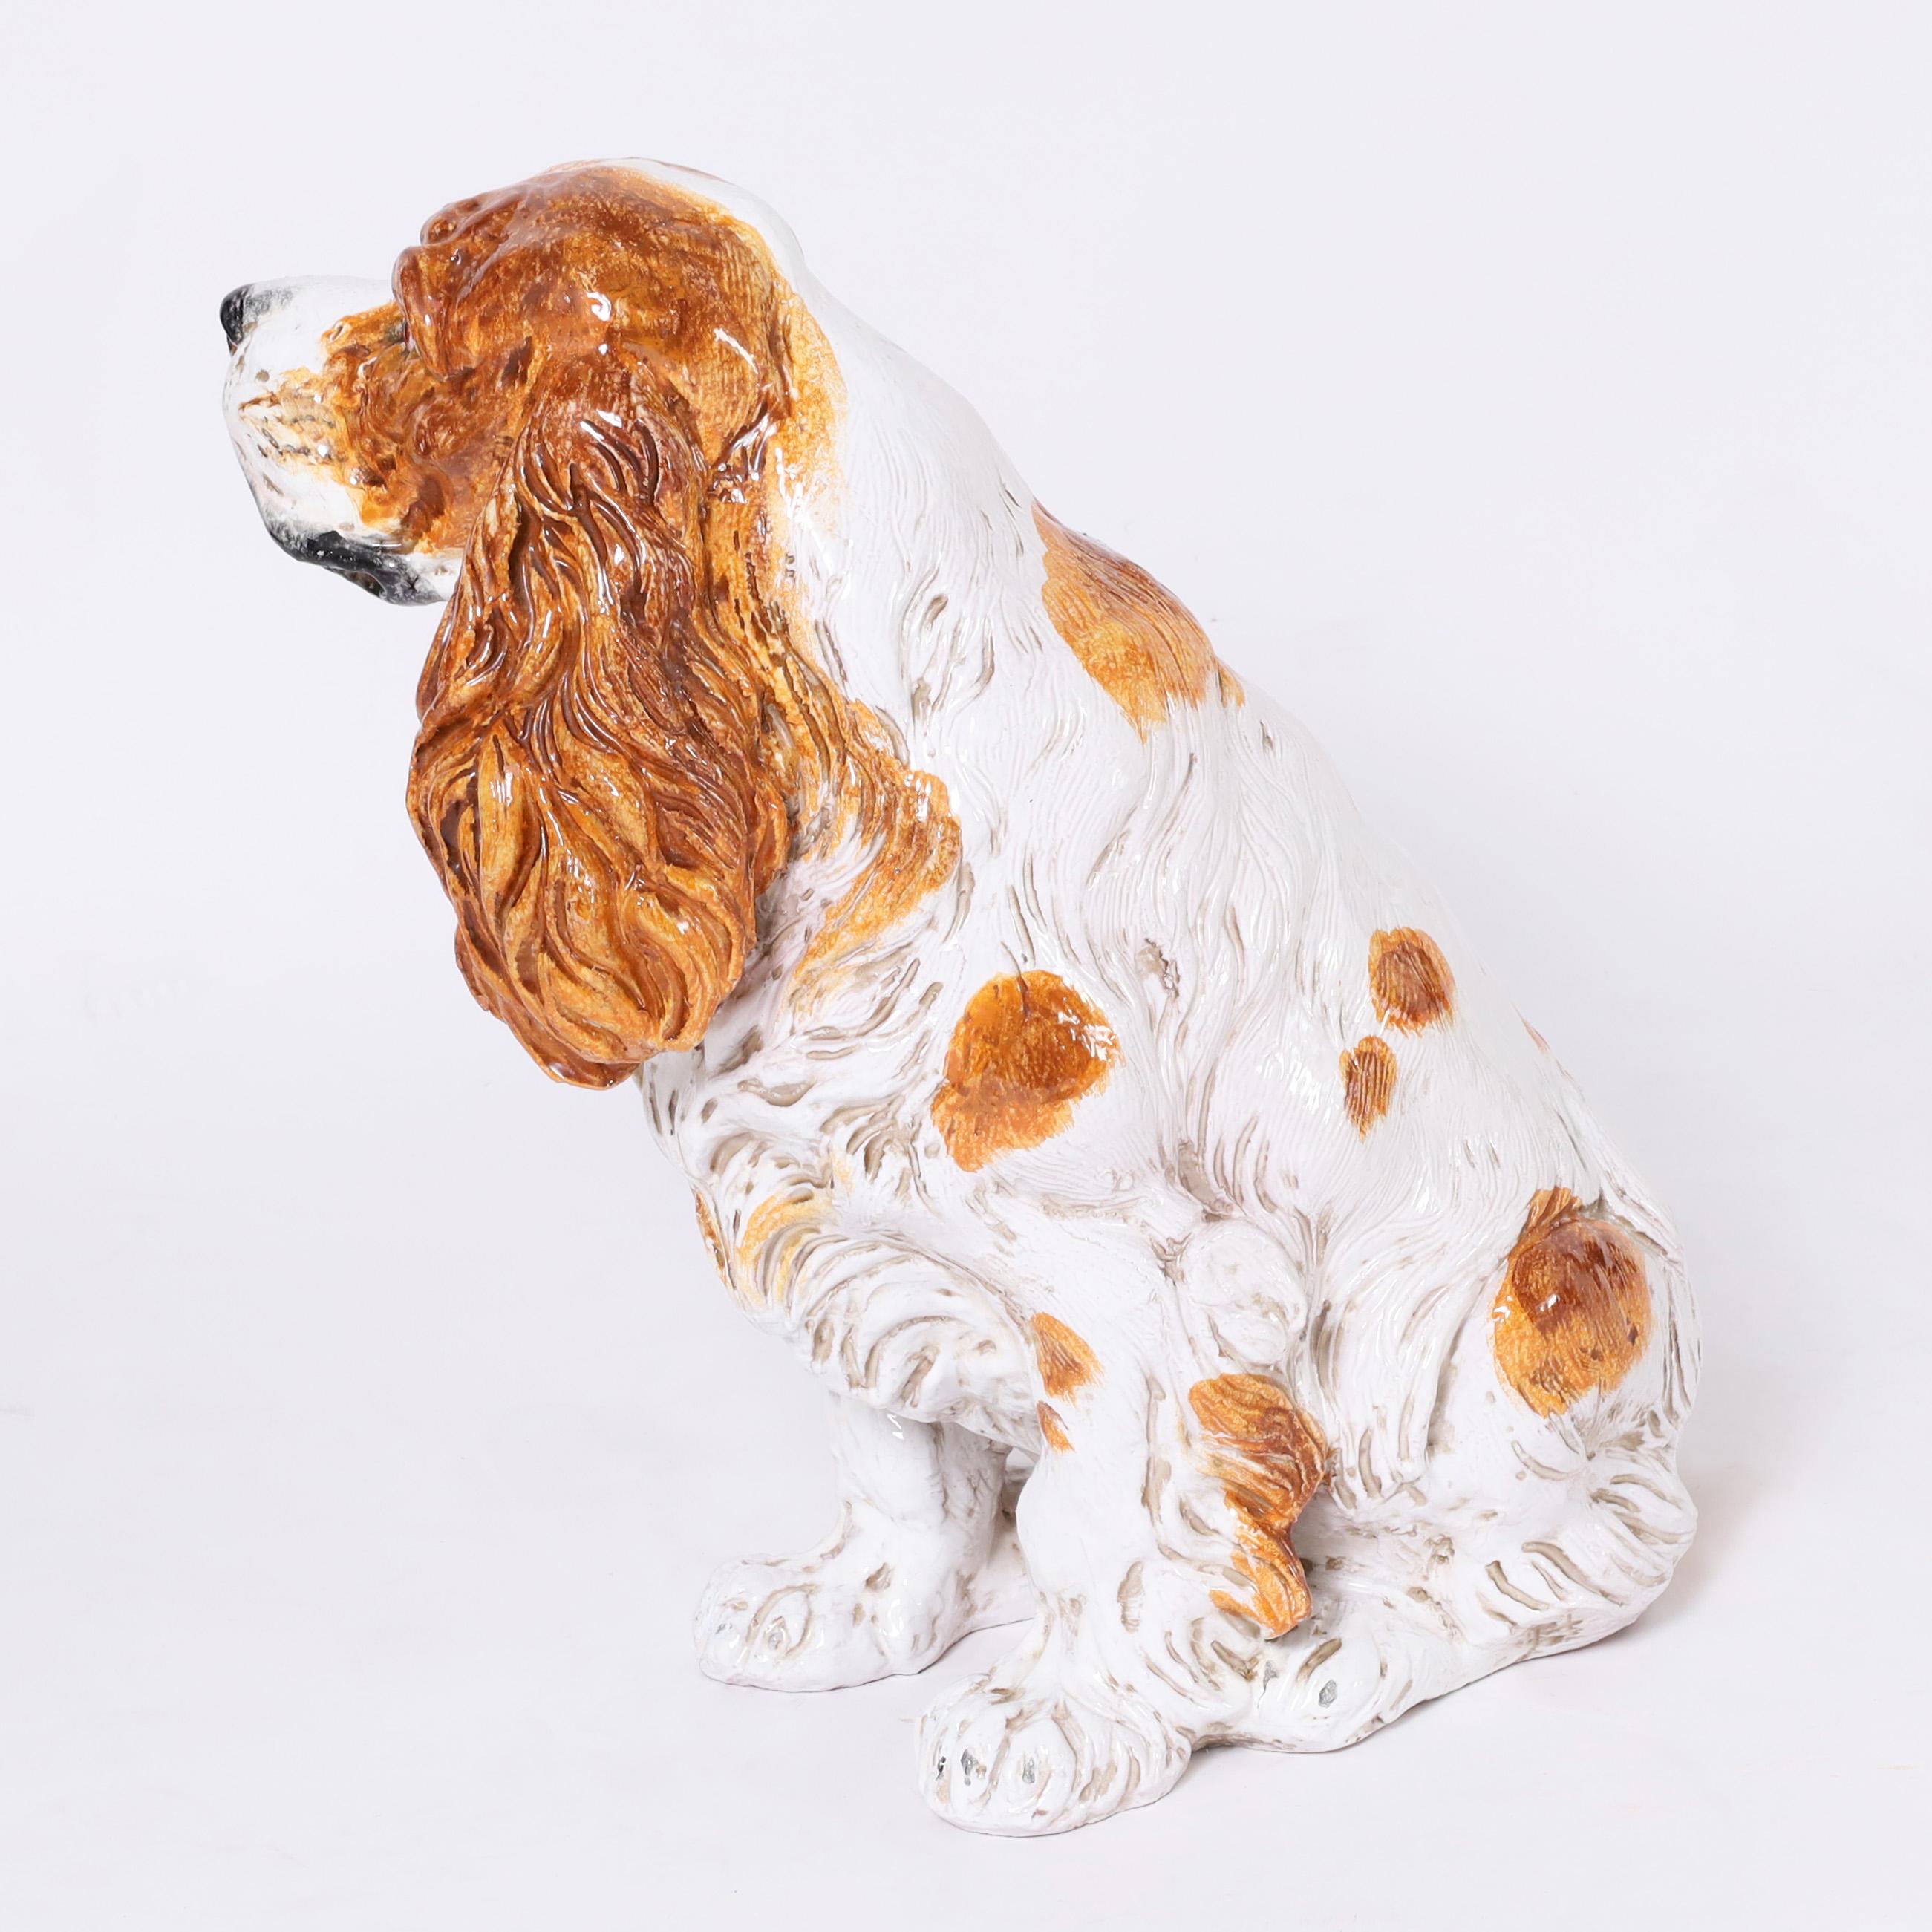 Italian Glazed Terra Cotta Cocker Spaniel or Dog - Other Art Style Sculpture by Unknown